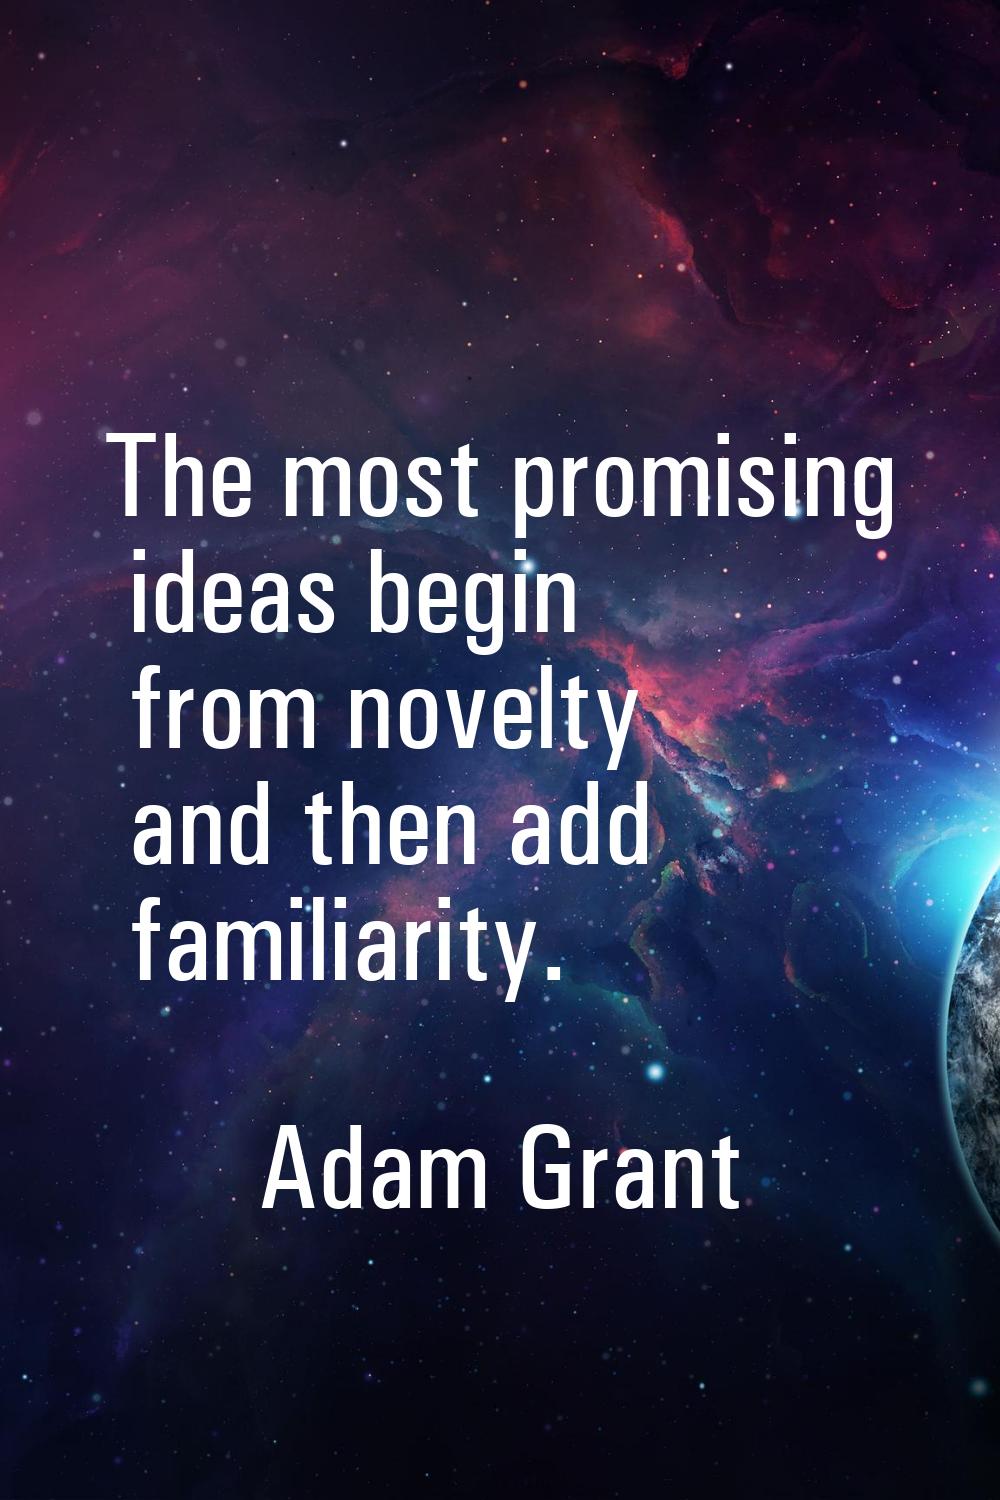 The most promising ideas begin from novelty and then add familiarity.